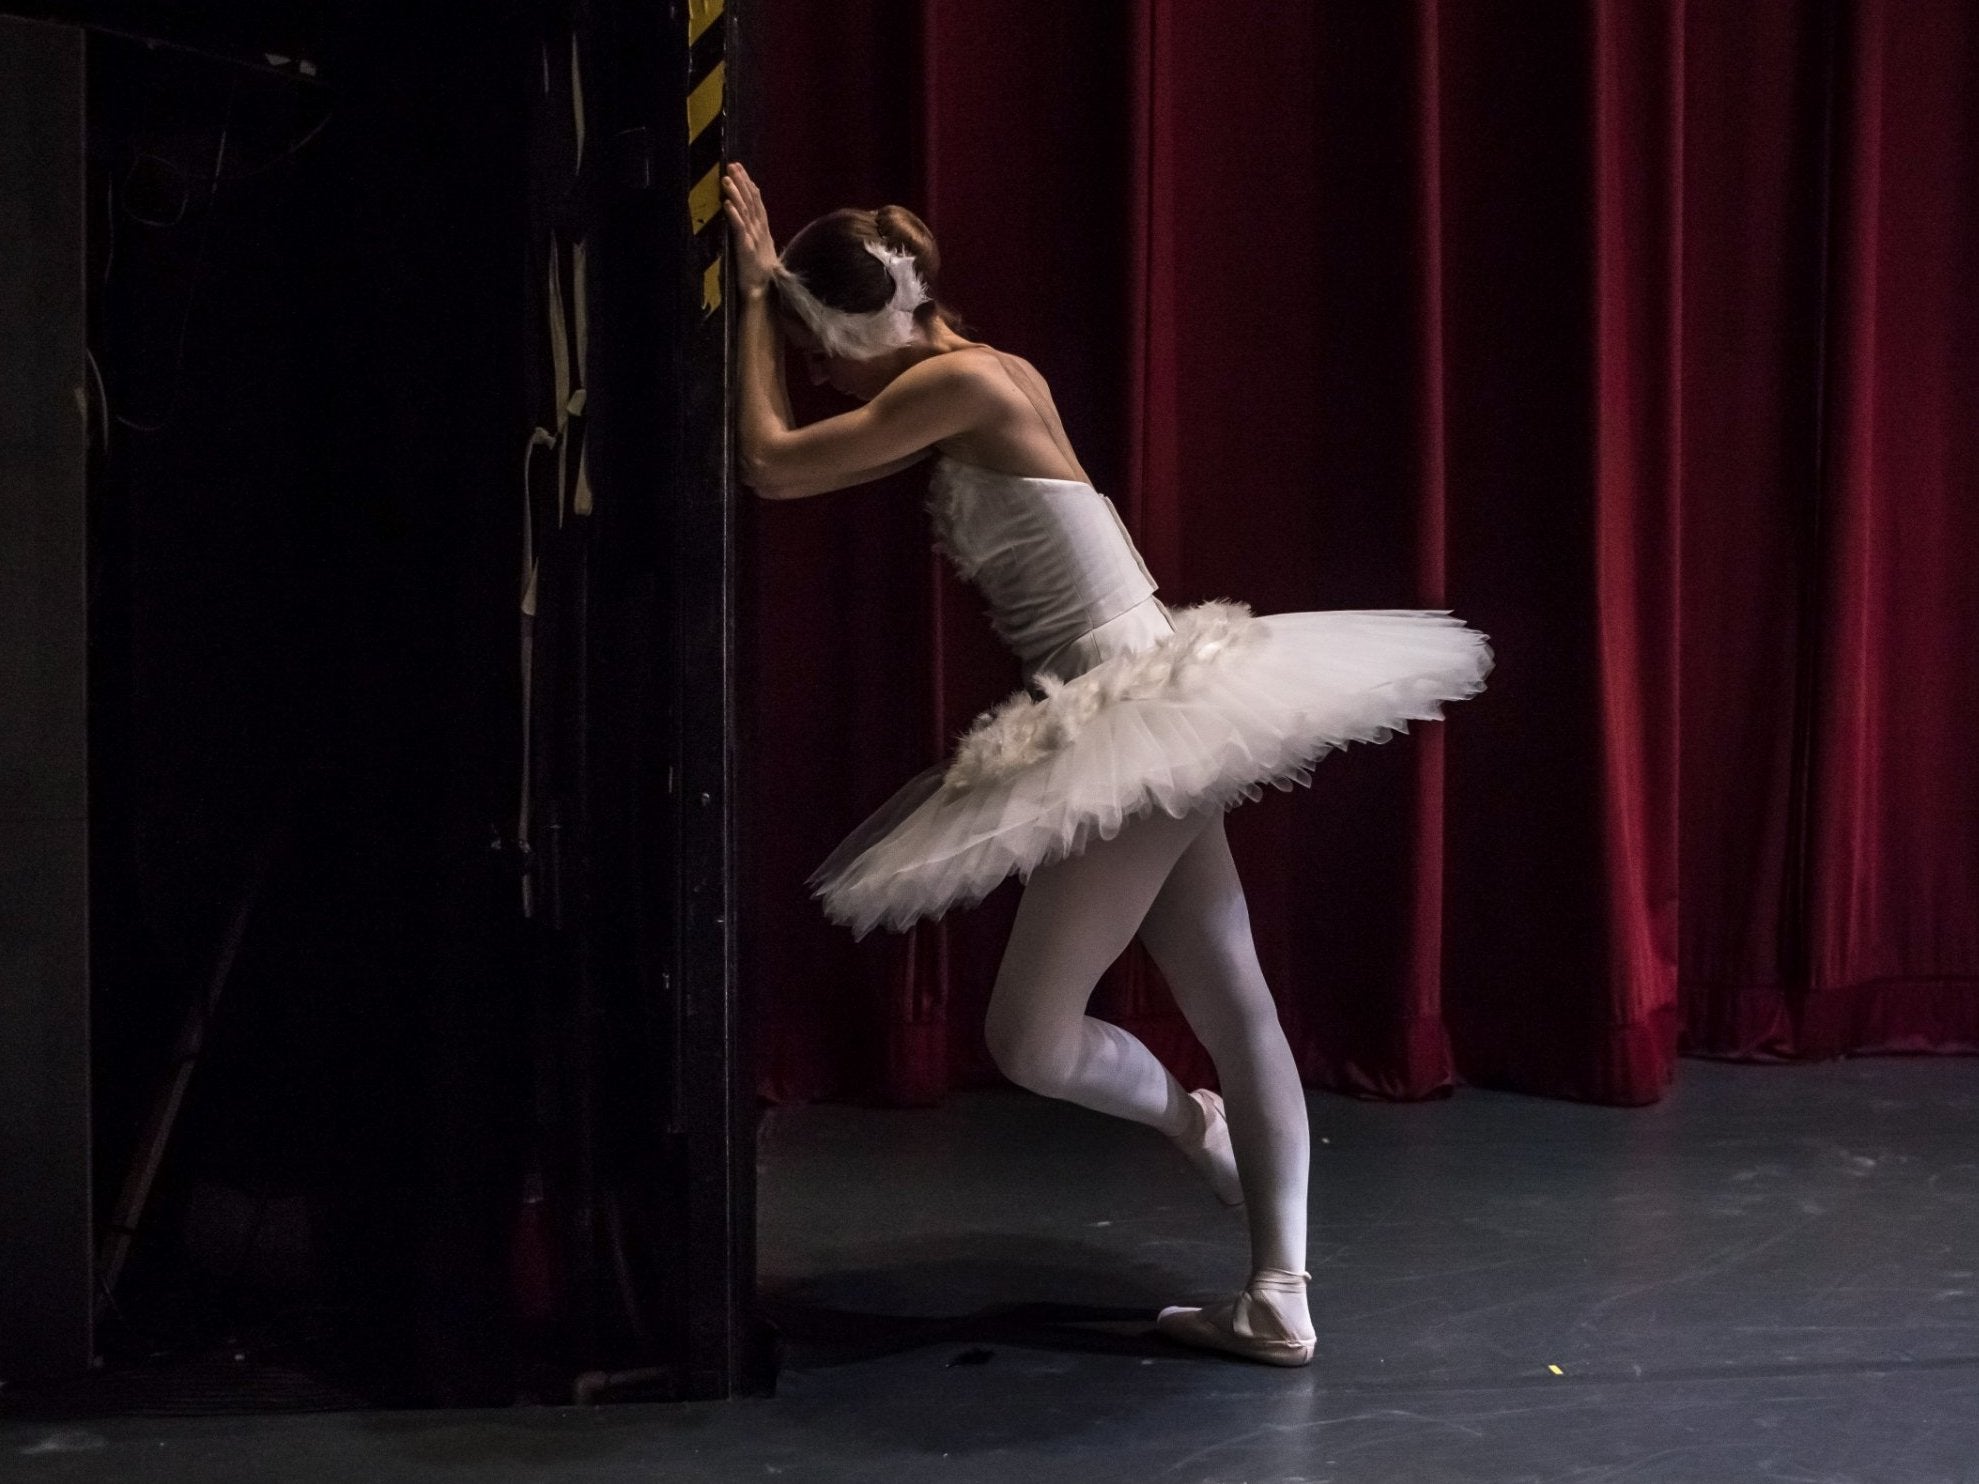 Swan Lake in photos Behind the scenes of ballet's most famous